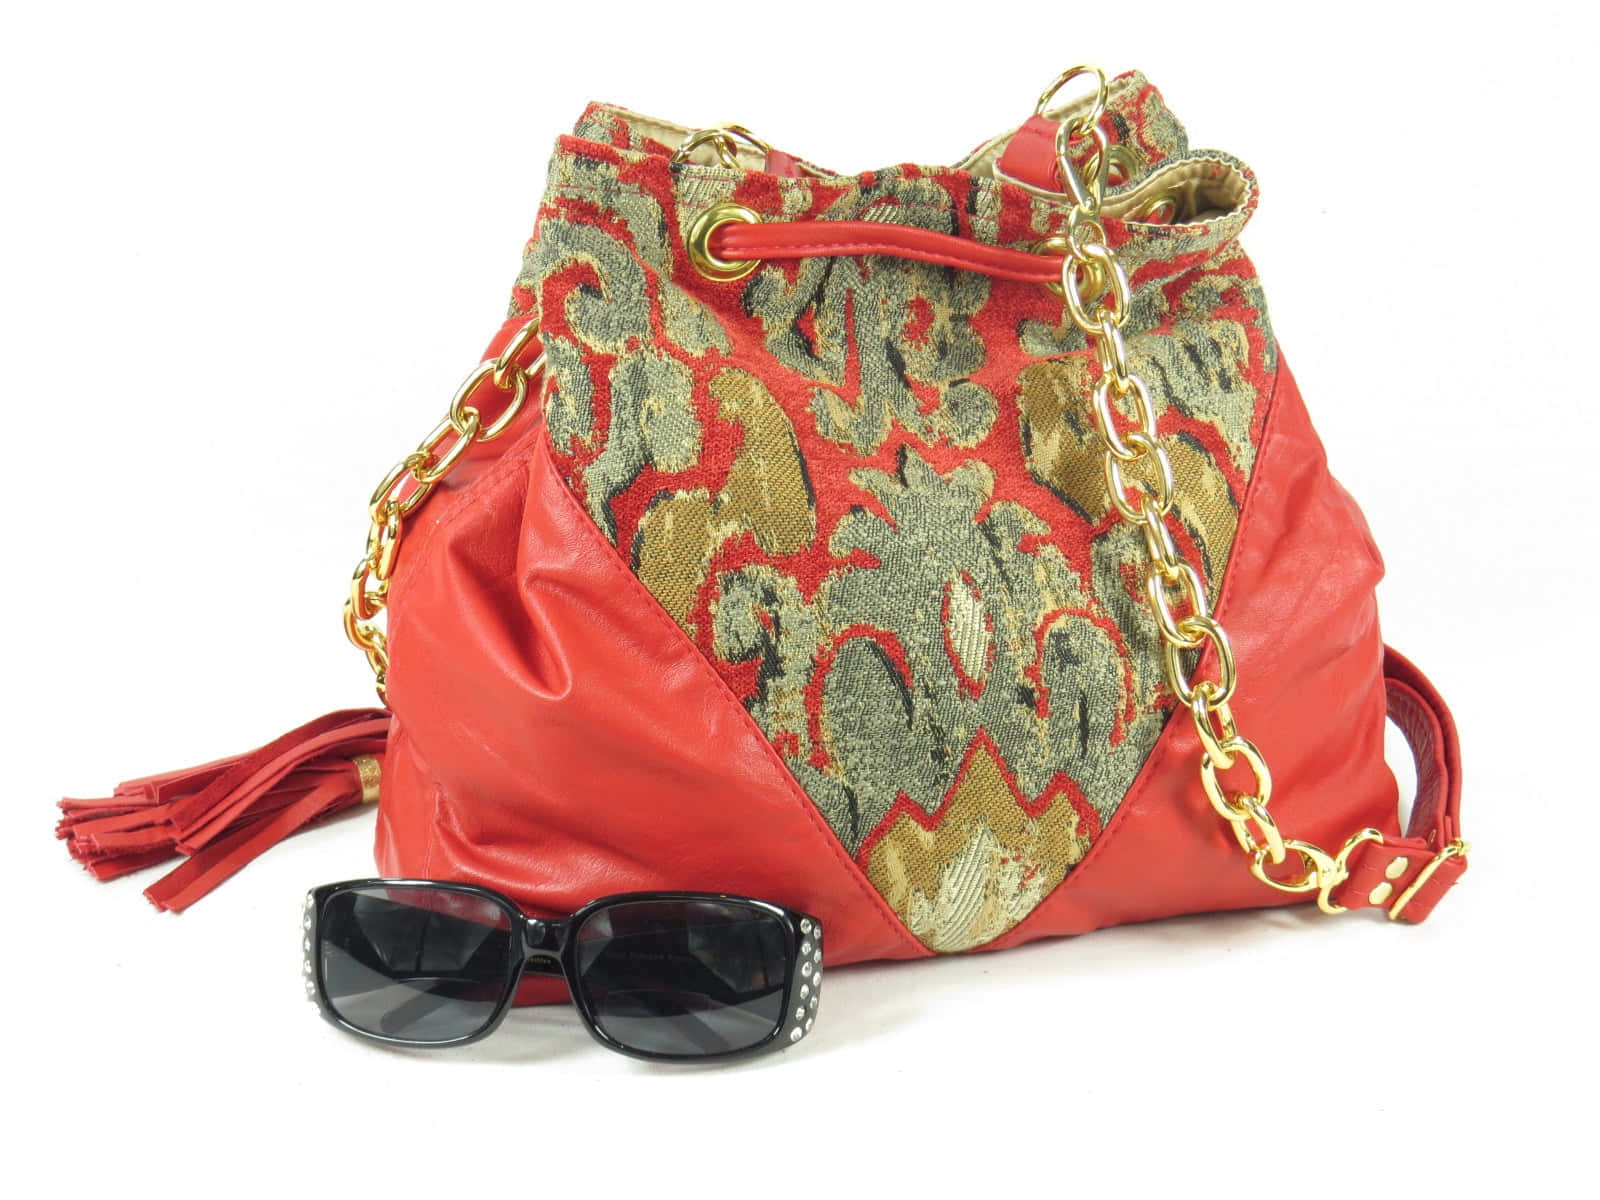 Stylish Red Handbag on a Solid Background Wallpaper